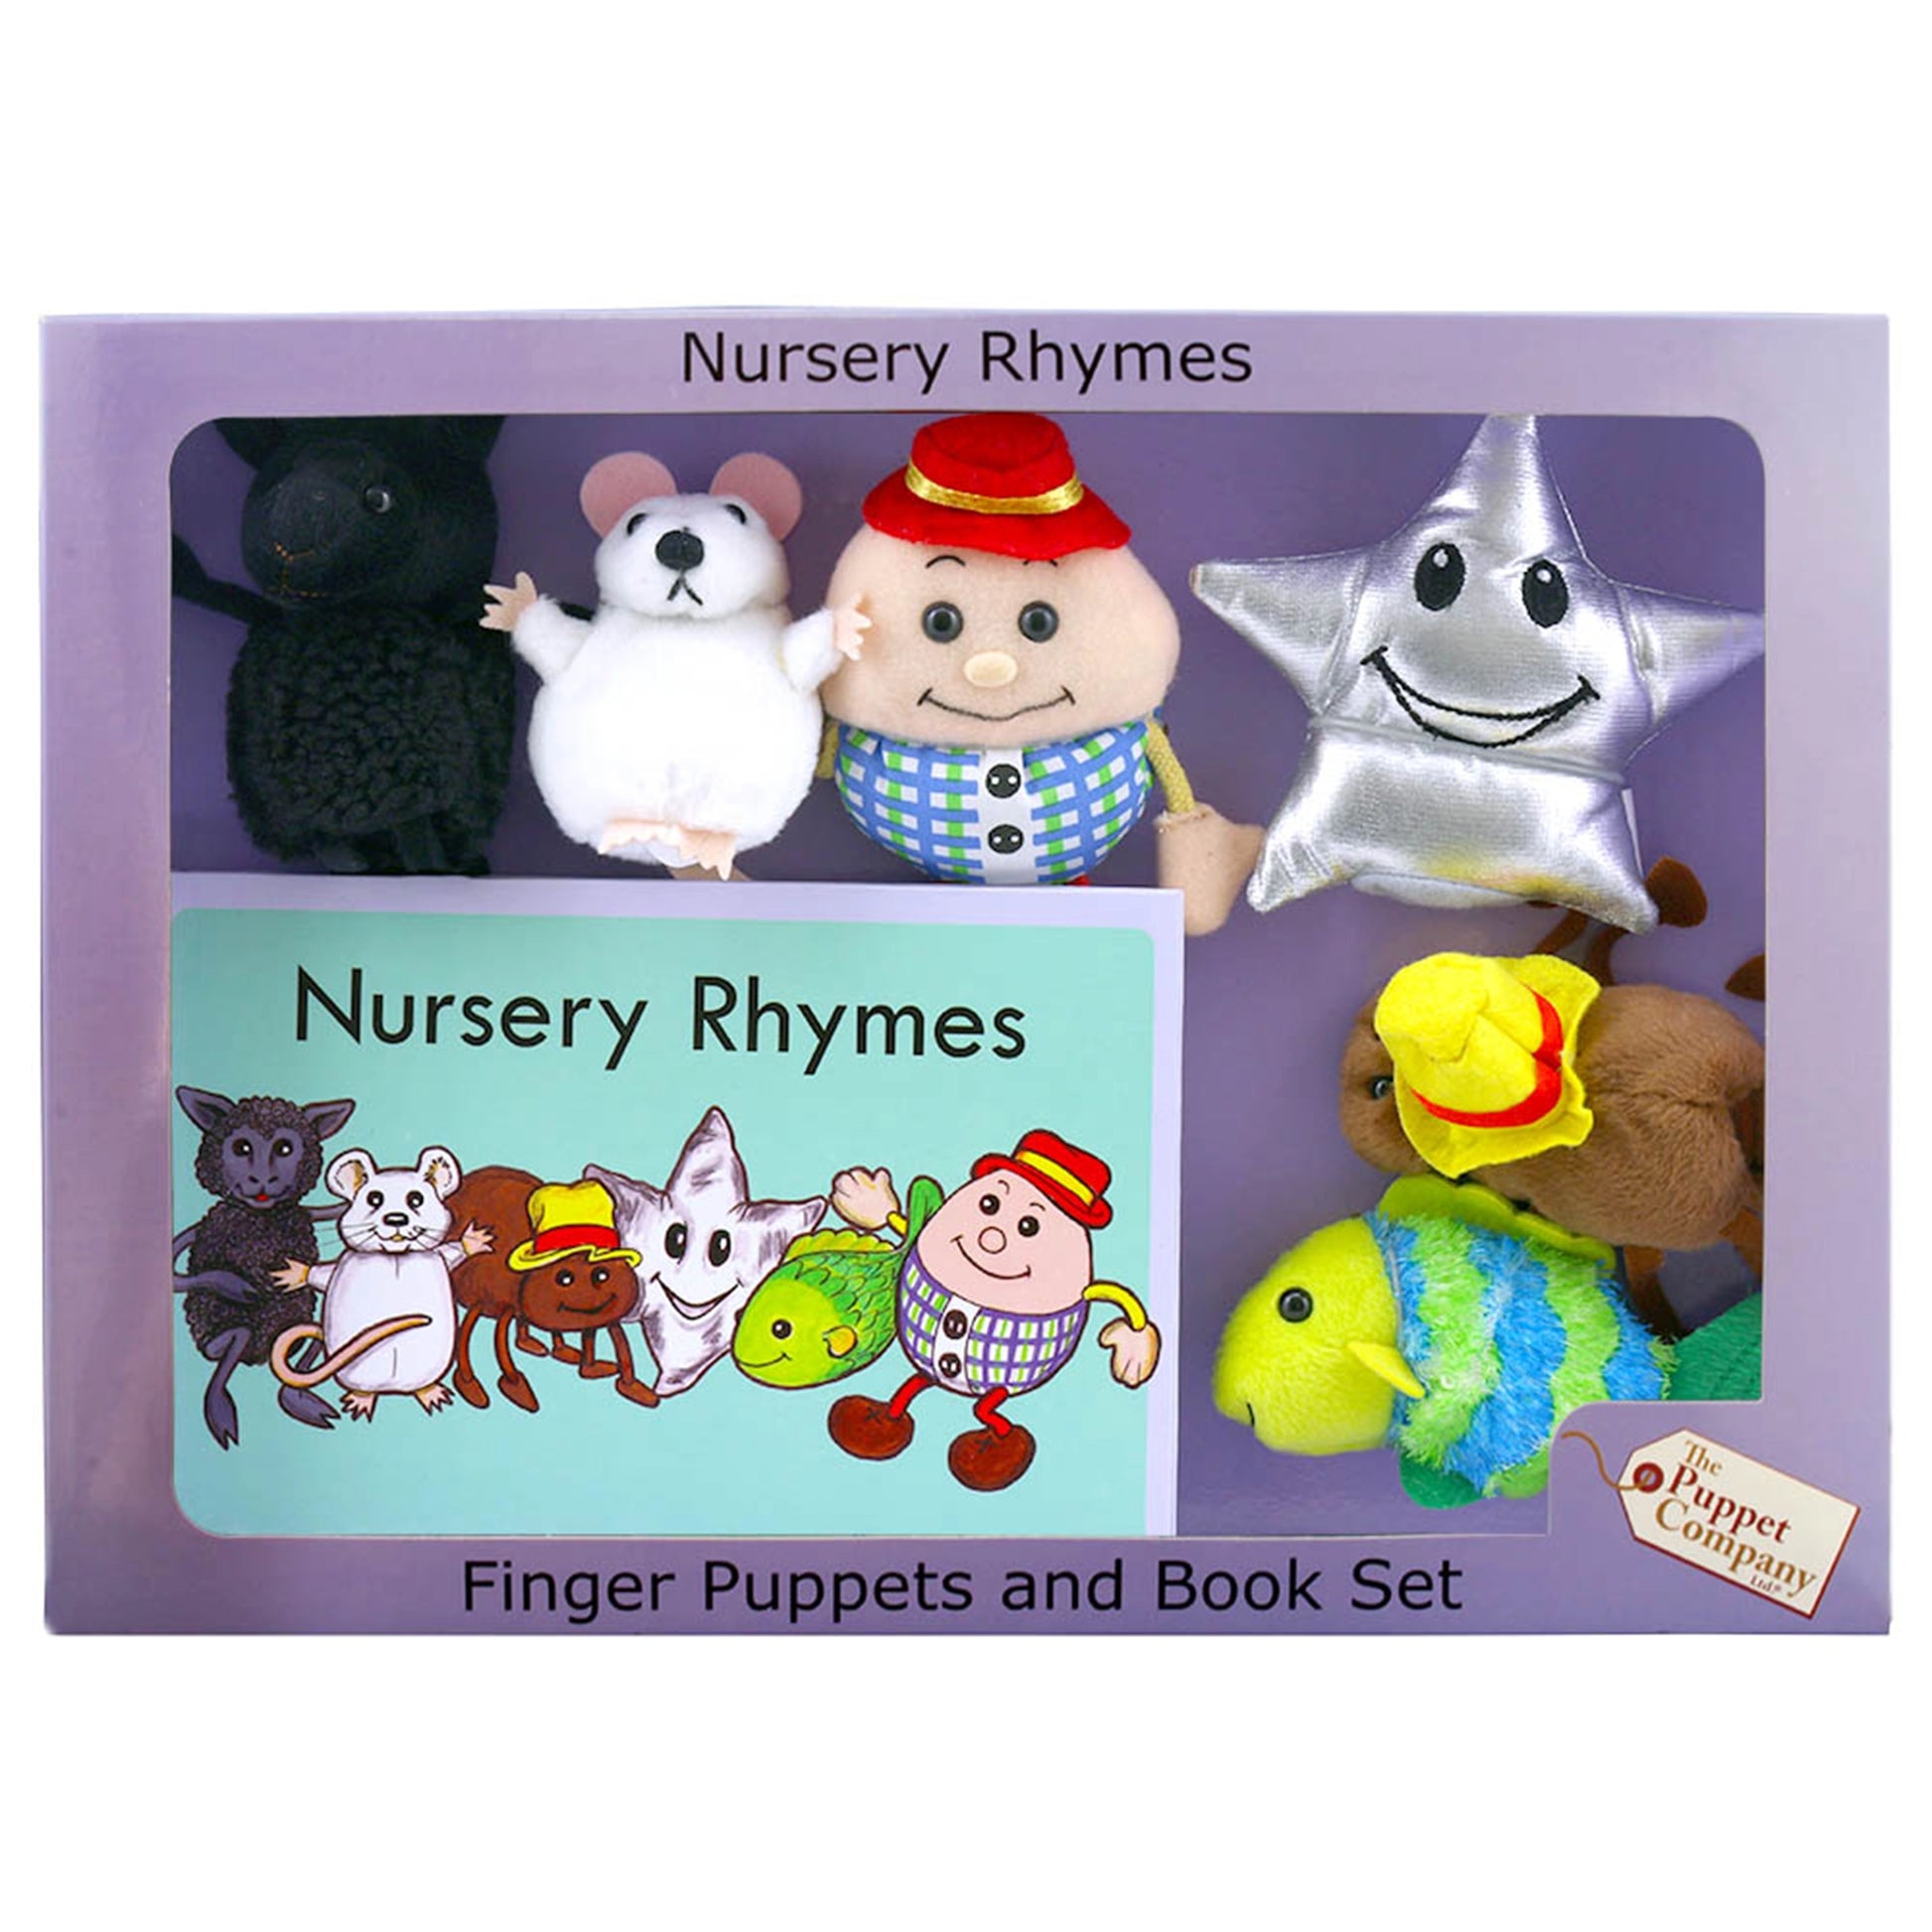 Traditional Story Sets - Nursery Rhymes - The Puppet Company - The Forgotten Toy Shop